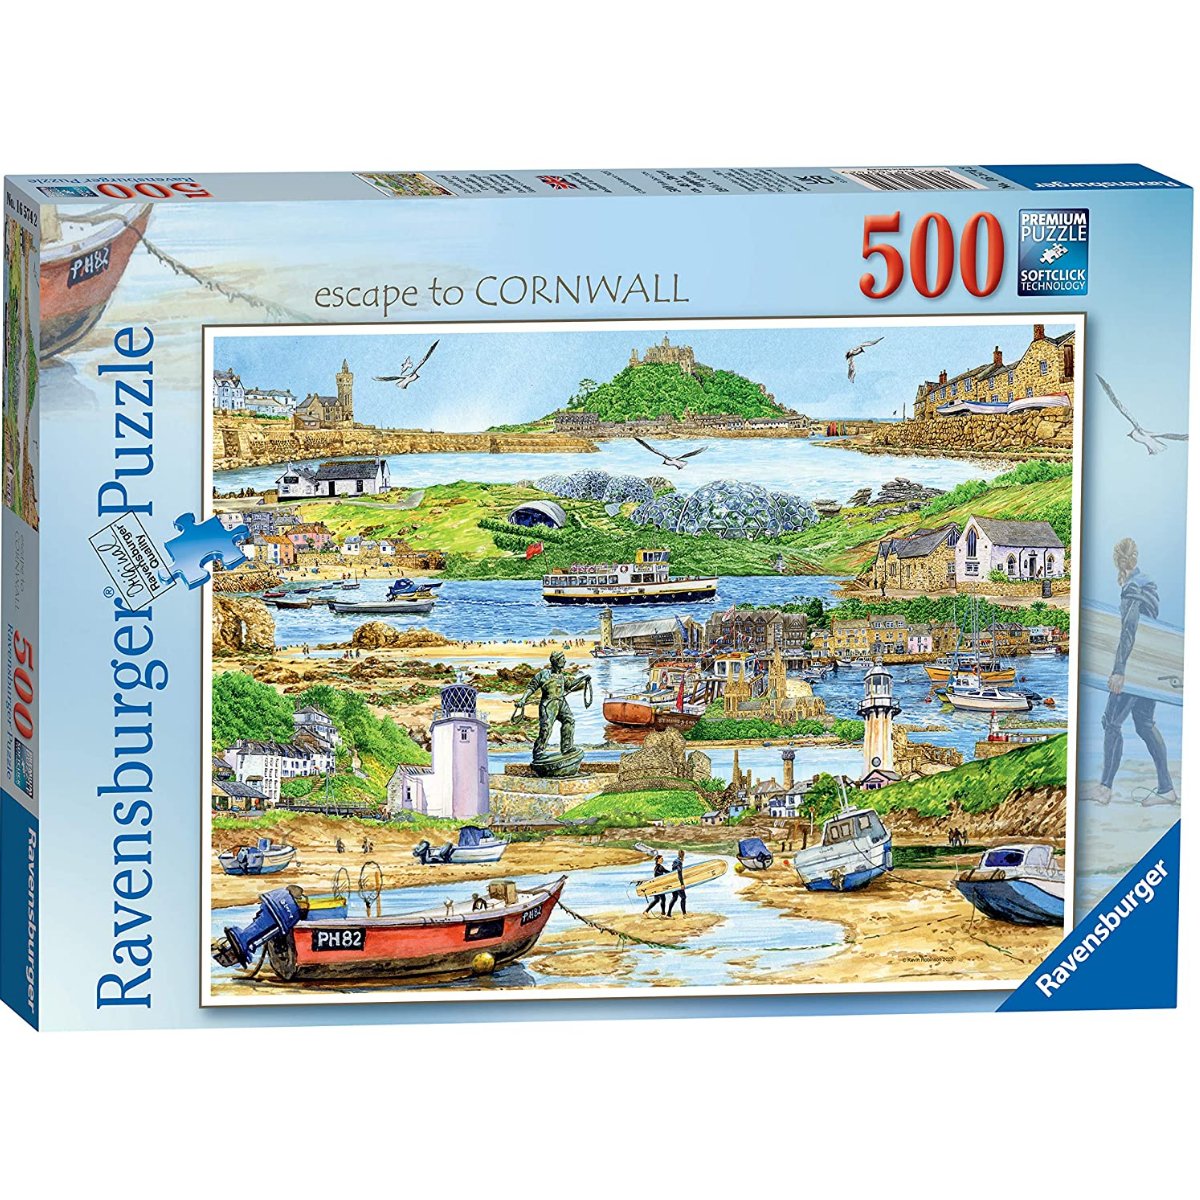 Ravensburger Escape to Cornwall 500 Piece Jigsaw Puzzle - Phillips Hobbies